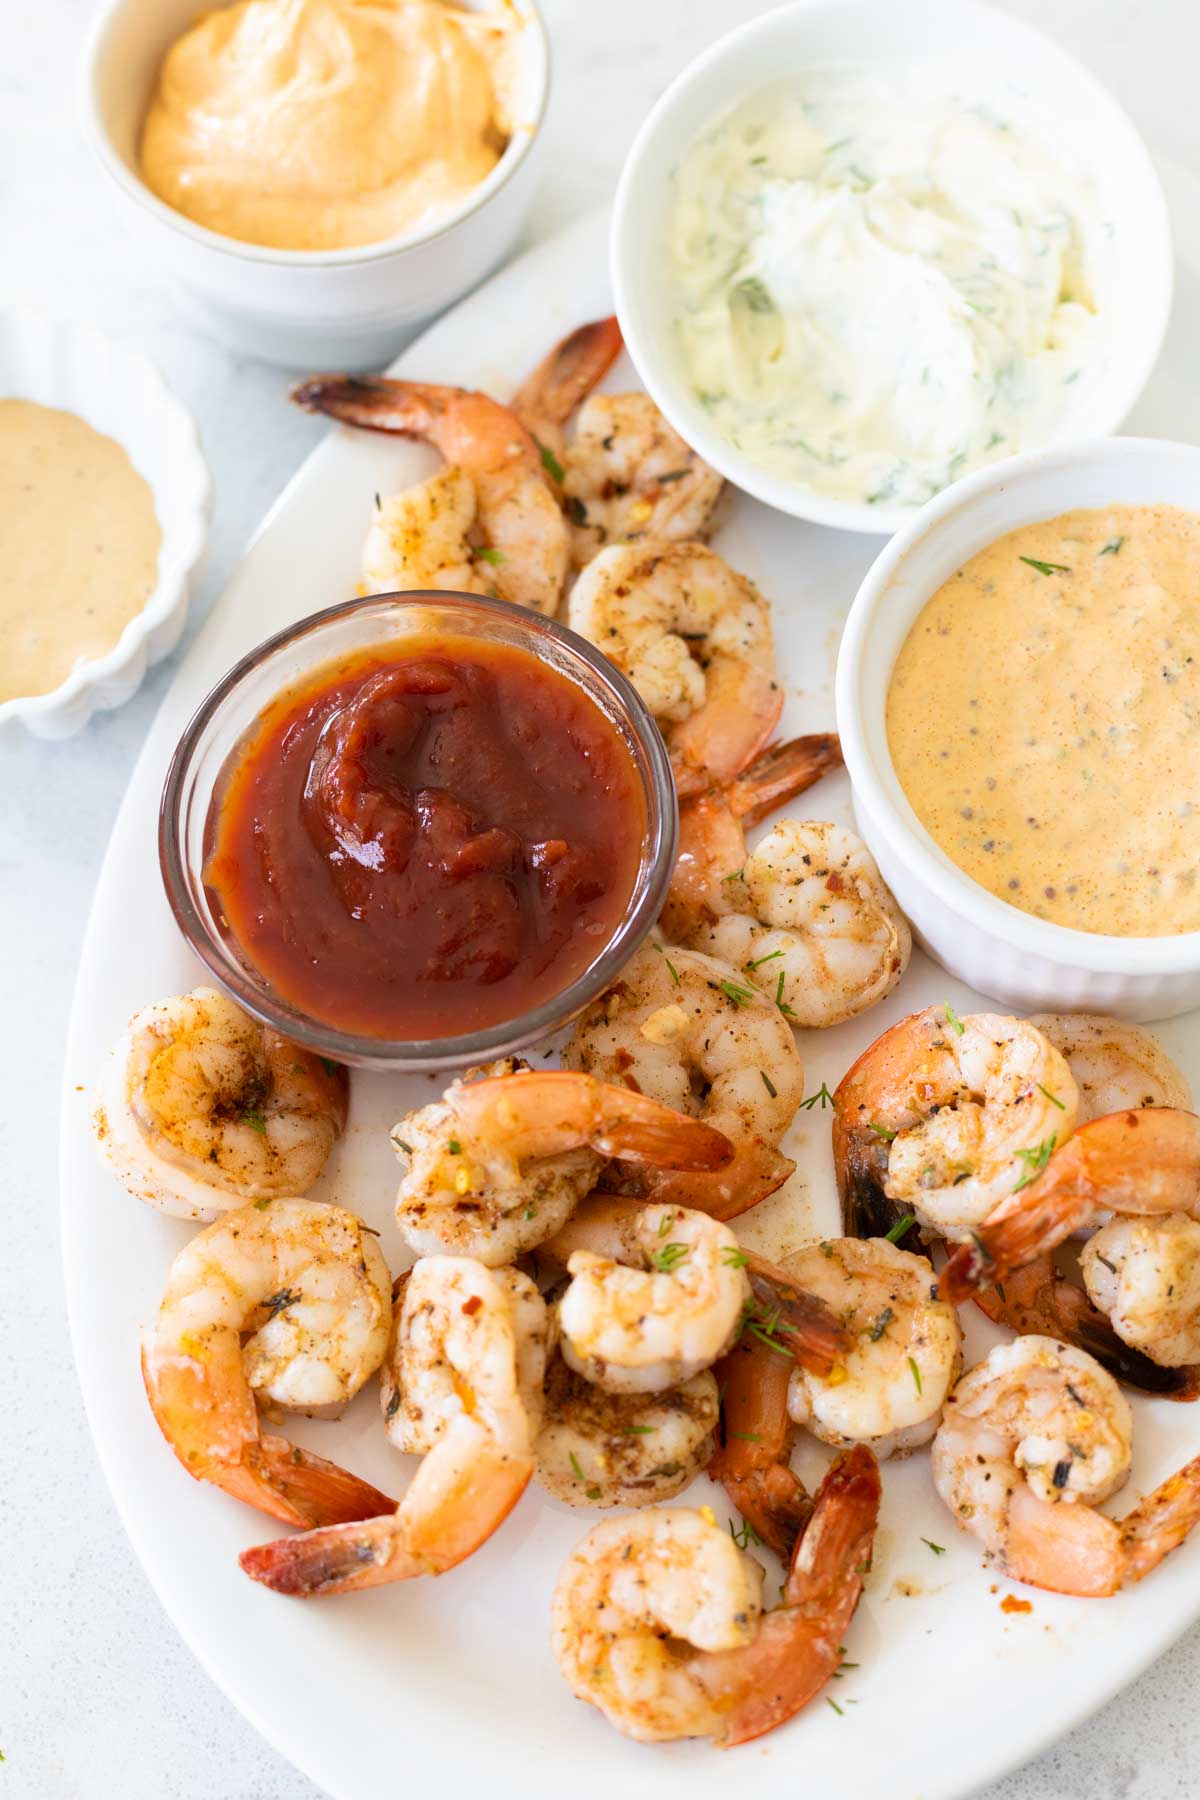 A platter of shrimp has several cups of dip on the platter.